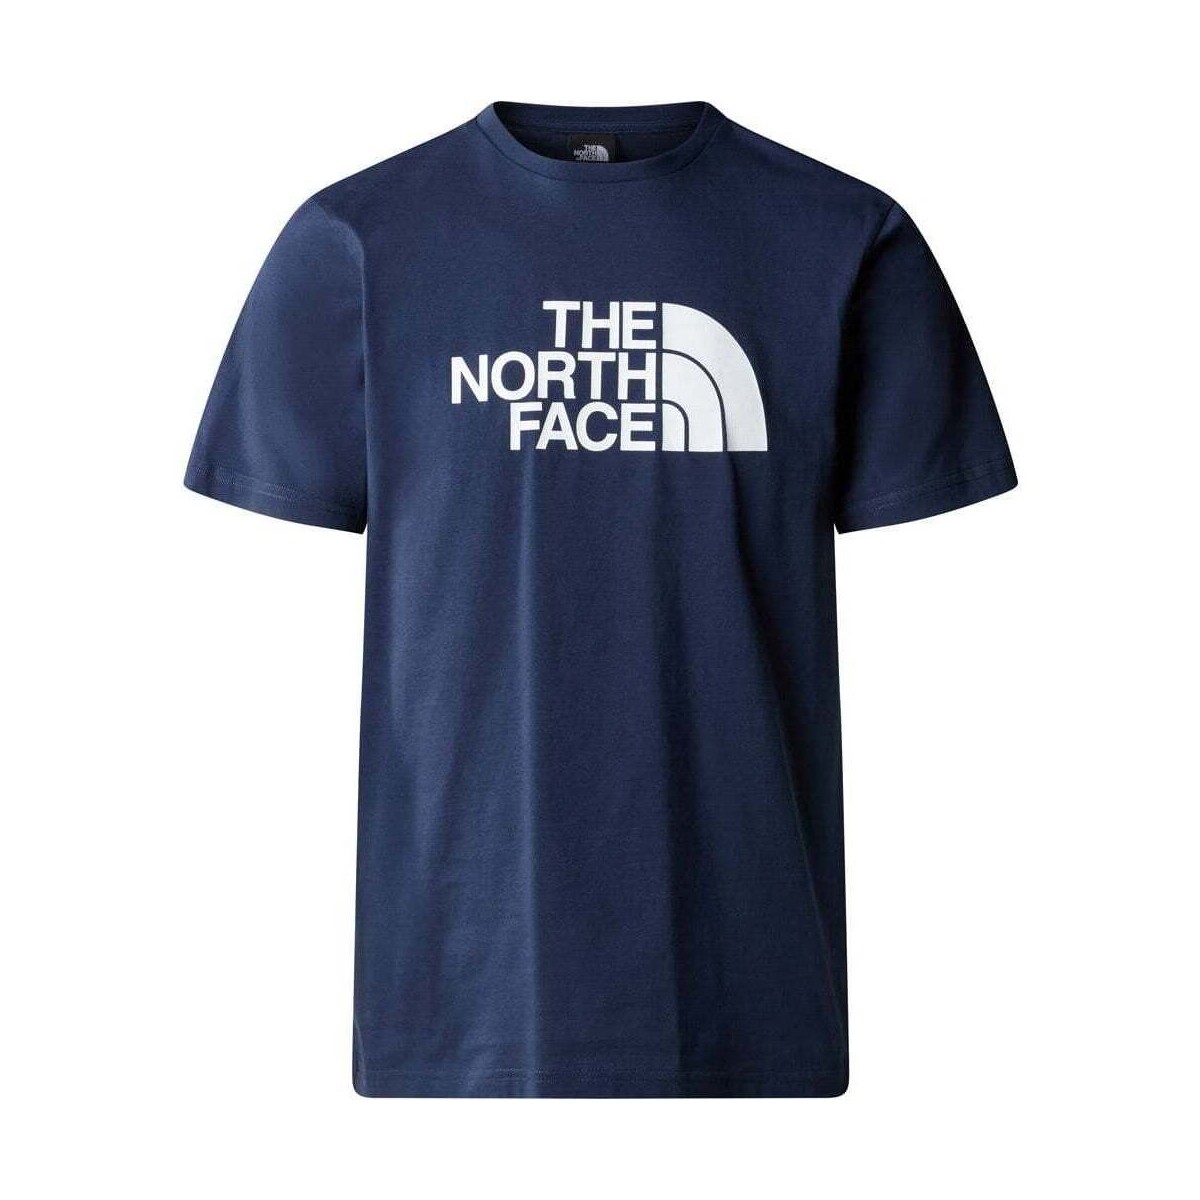 Vêtements Homme Polos manches courtes The North Face M S/S EASY TEE Bleu